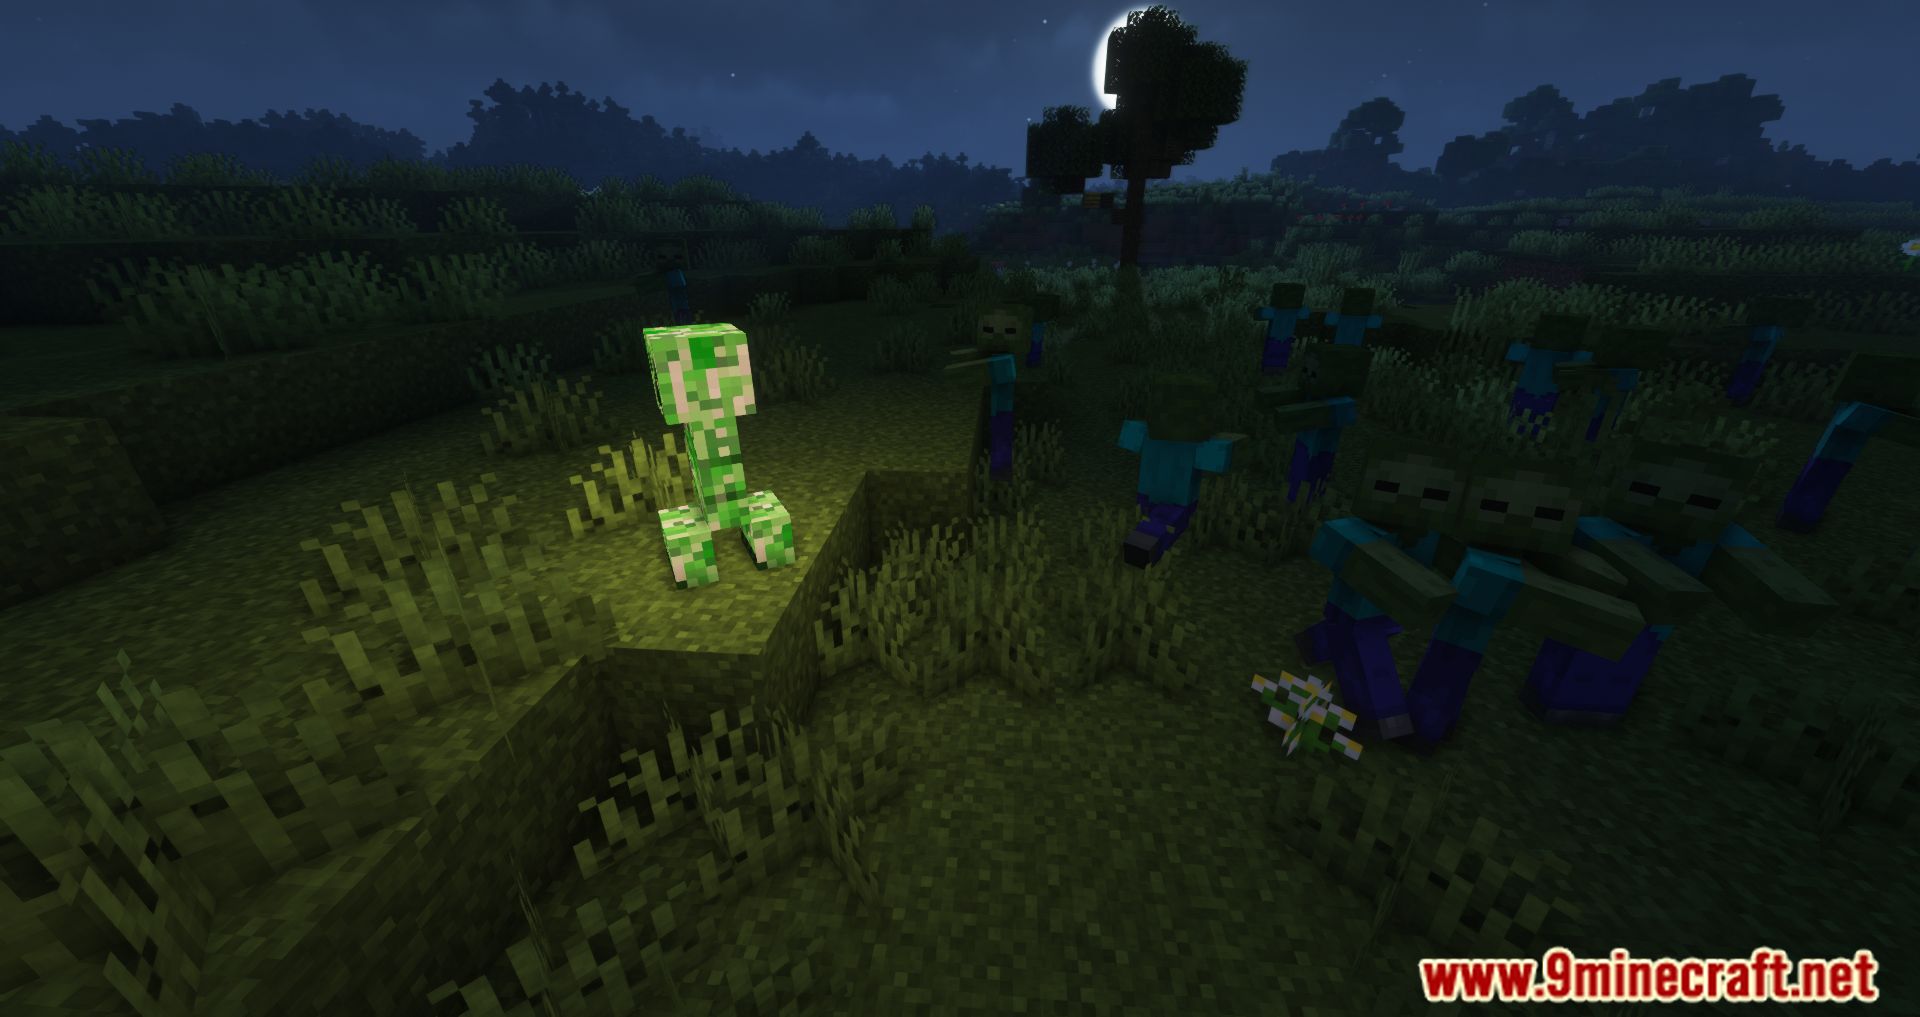 Well-Behaved Mobs Mod (1.16.5, 1.15.2) - Minor Tweaks To The Behavior Of A Few Mobs 10